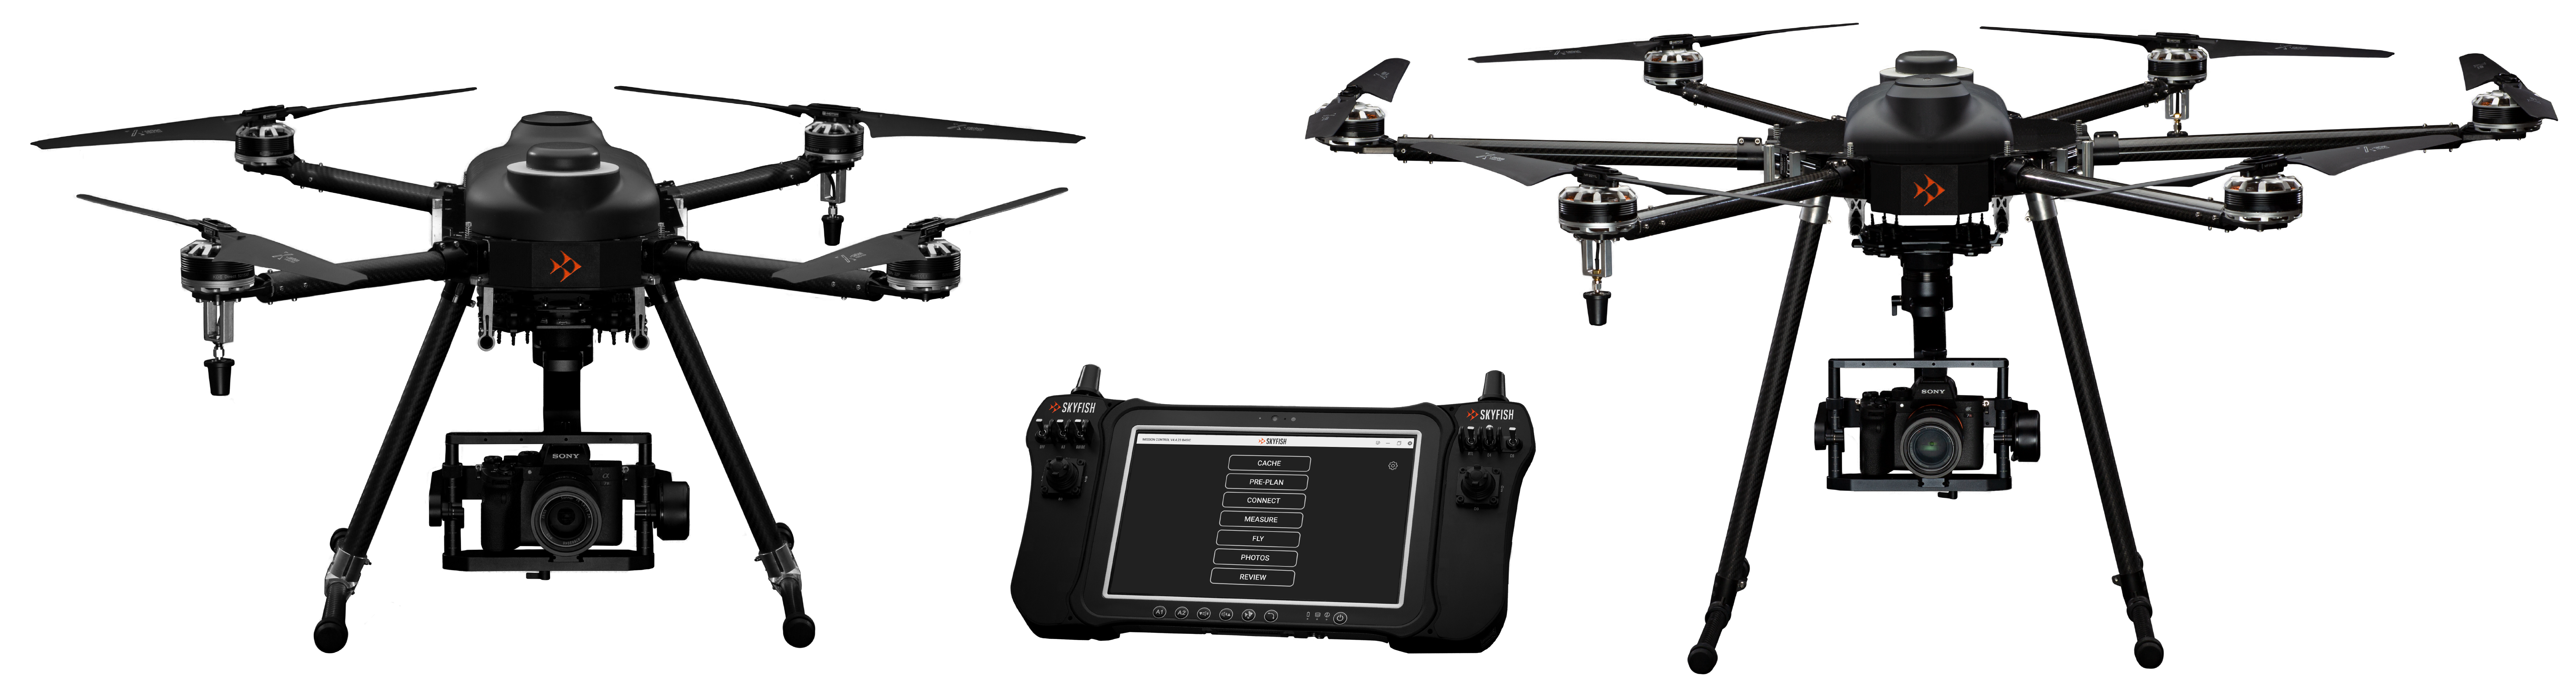 Skyfish Line of Products - M4 Drone M6 Drone C1 Controller